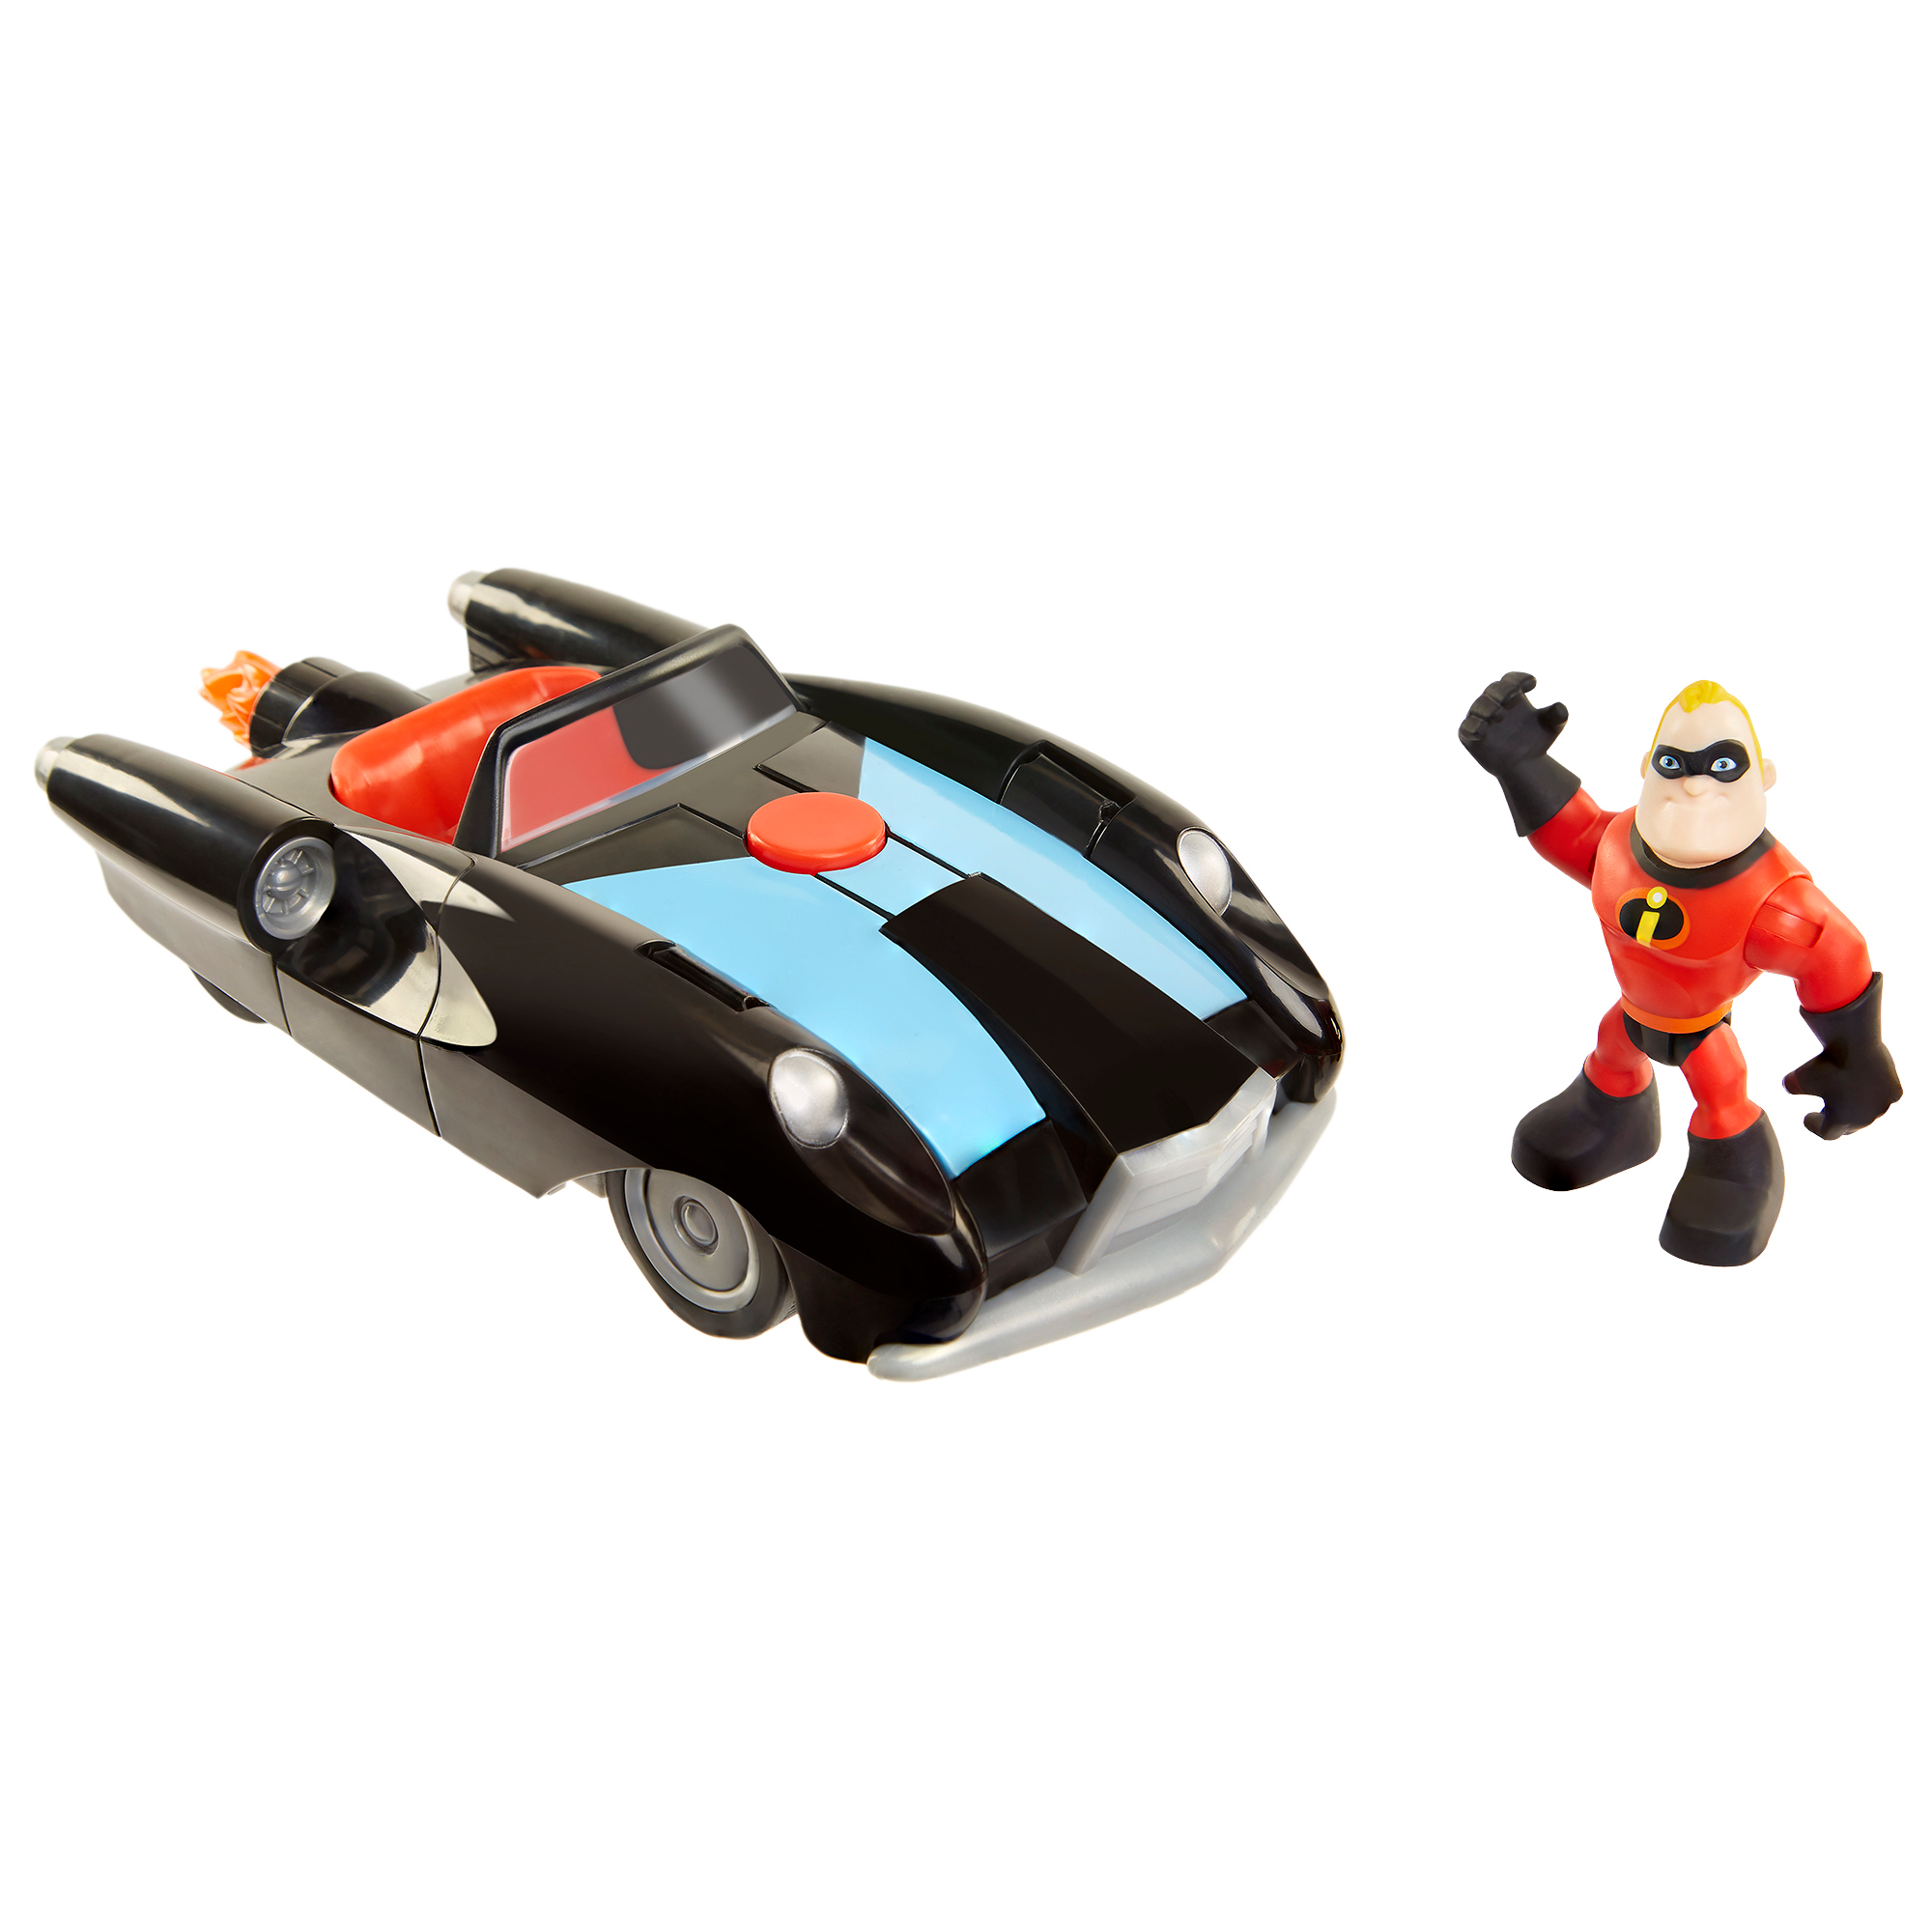 Incredibles 2 Junior Supers Vehicle Playset - Incredibile with Mr. Incredible